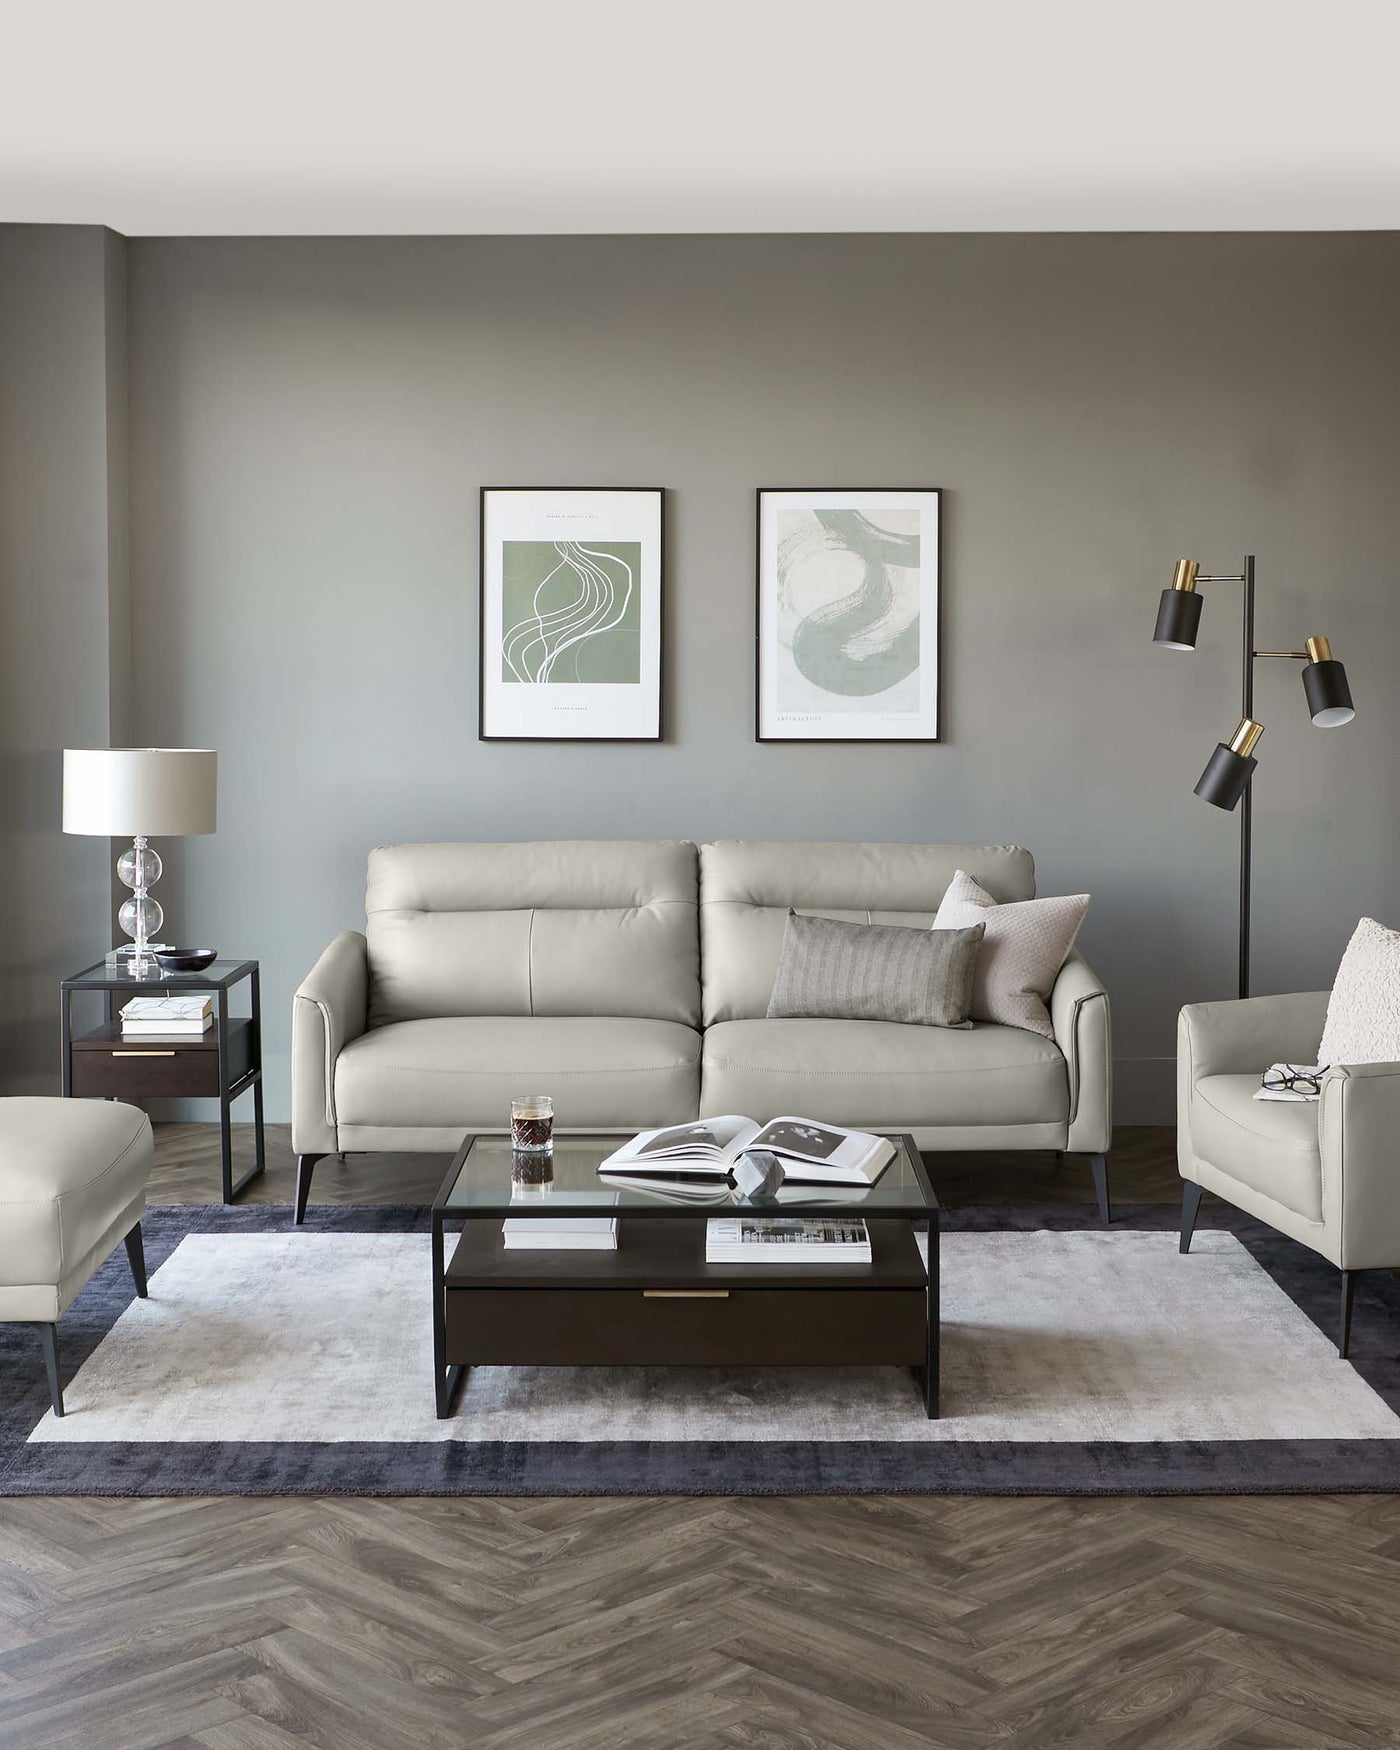 A modern living room setup featuring a light grey upholstered sofa with matching armchair and ottoman. A sleek, rectangular wooden coffee table with a glass top sits on a textured white and grey area rug, accompanied by a dark wood side table with a drawer. A tall floor lamp with multiple adjustable arms is positioned in the corner. Two framed abstract artworks hang above the sofa, completing the contemporary aesthetic.